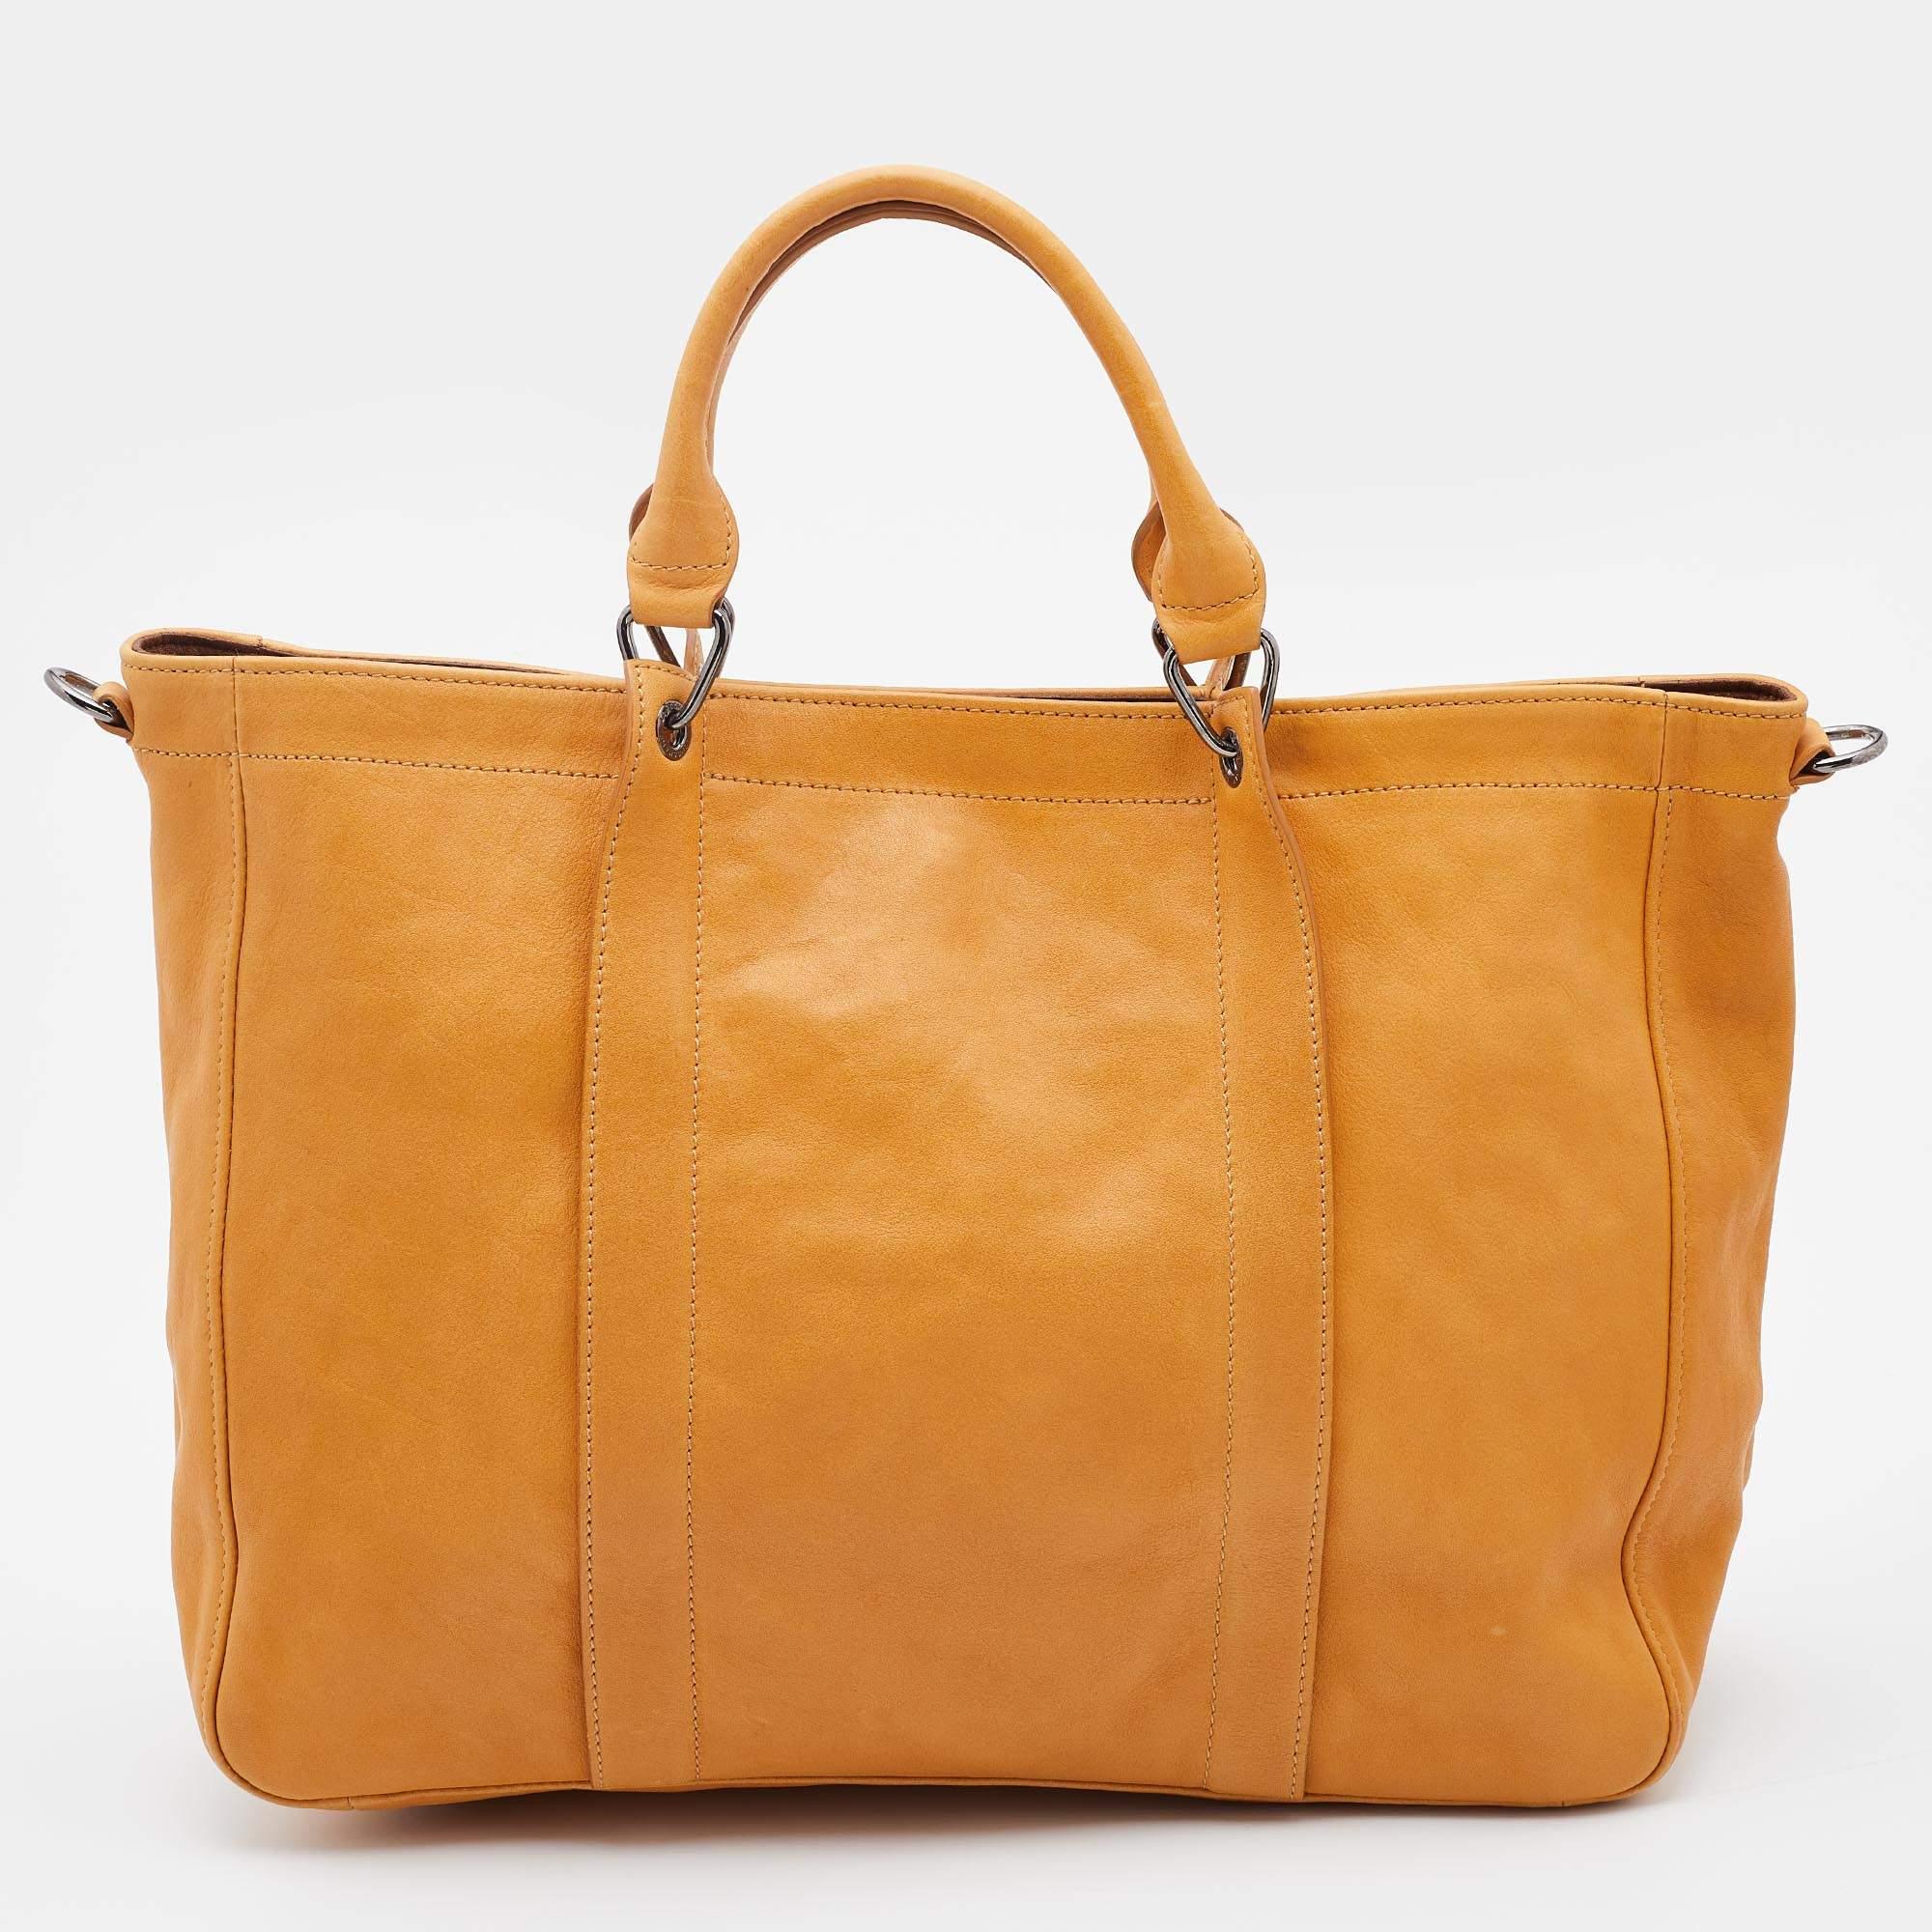 Be it your daily commute to work, shopping sprees, and vacations, a Longchamp tote bag will never fail you. This designer creation is made to last and assist you in your fashion-filled days.

Includes: Original Dustbag, Detachable Strap

